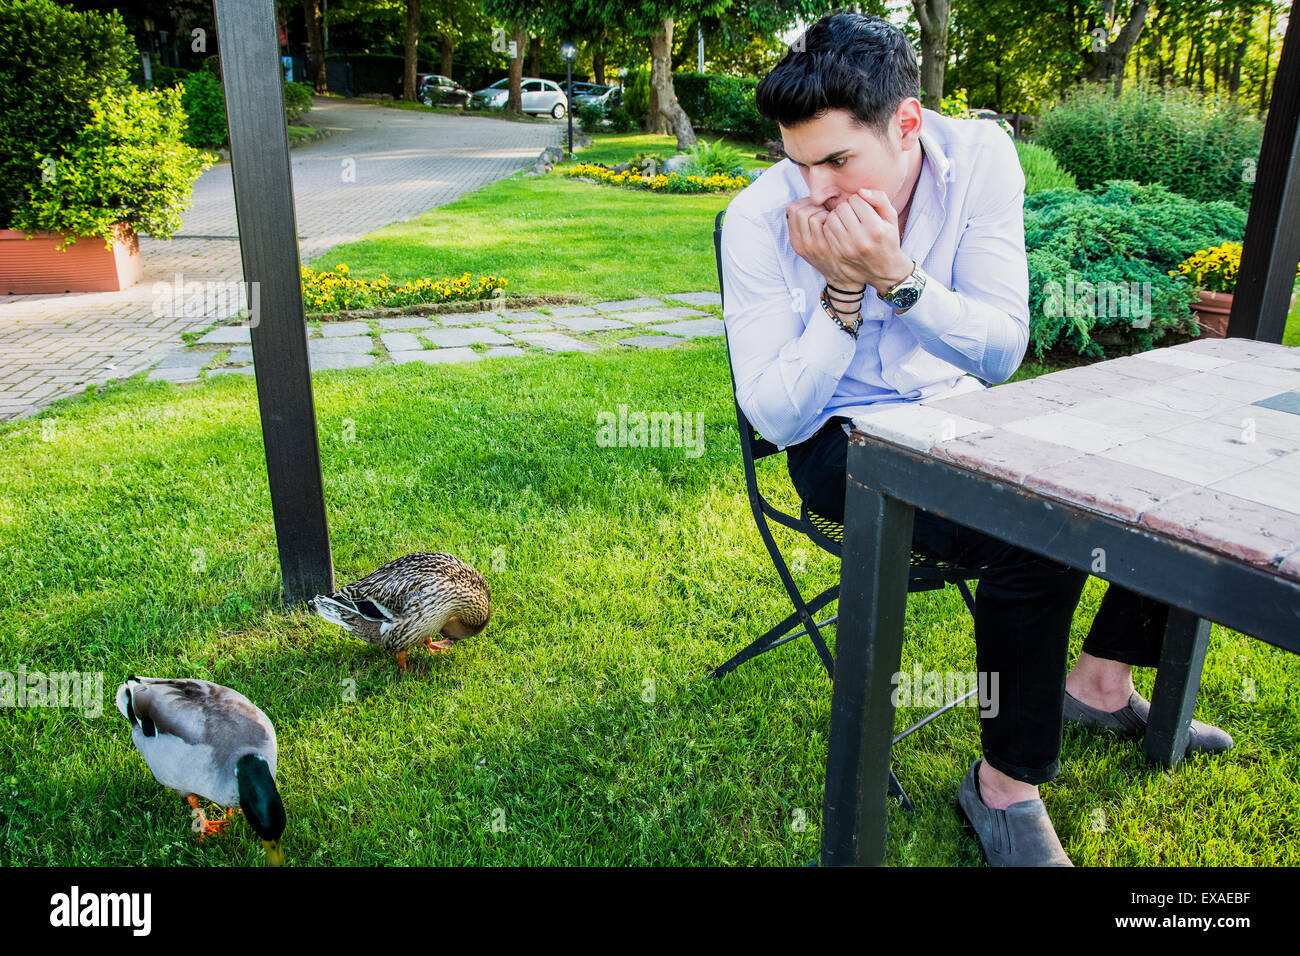 Frightened Young Man Sitting at Outdoor Table and Staring Nervously at Pair of Mallard Ducks Grazing on Green Grass Stock Photo